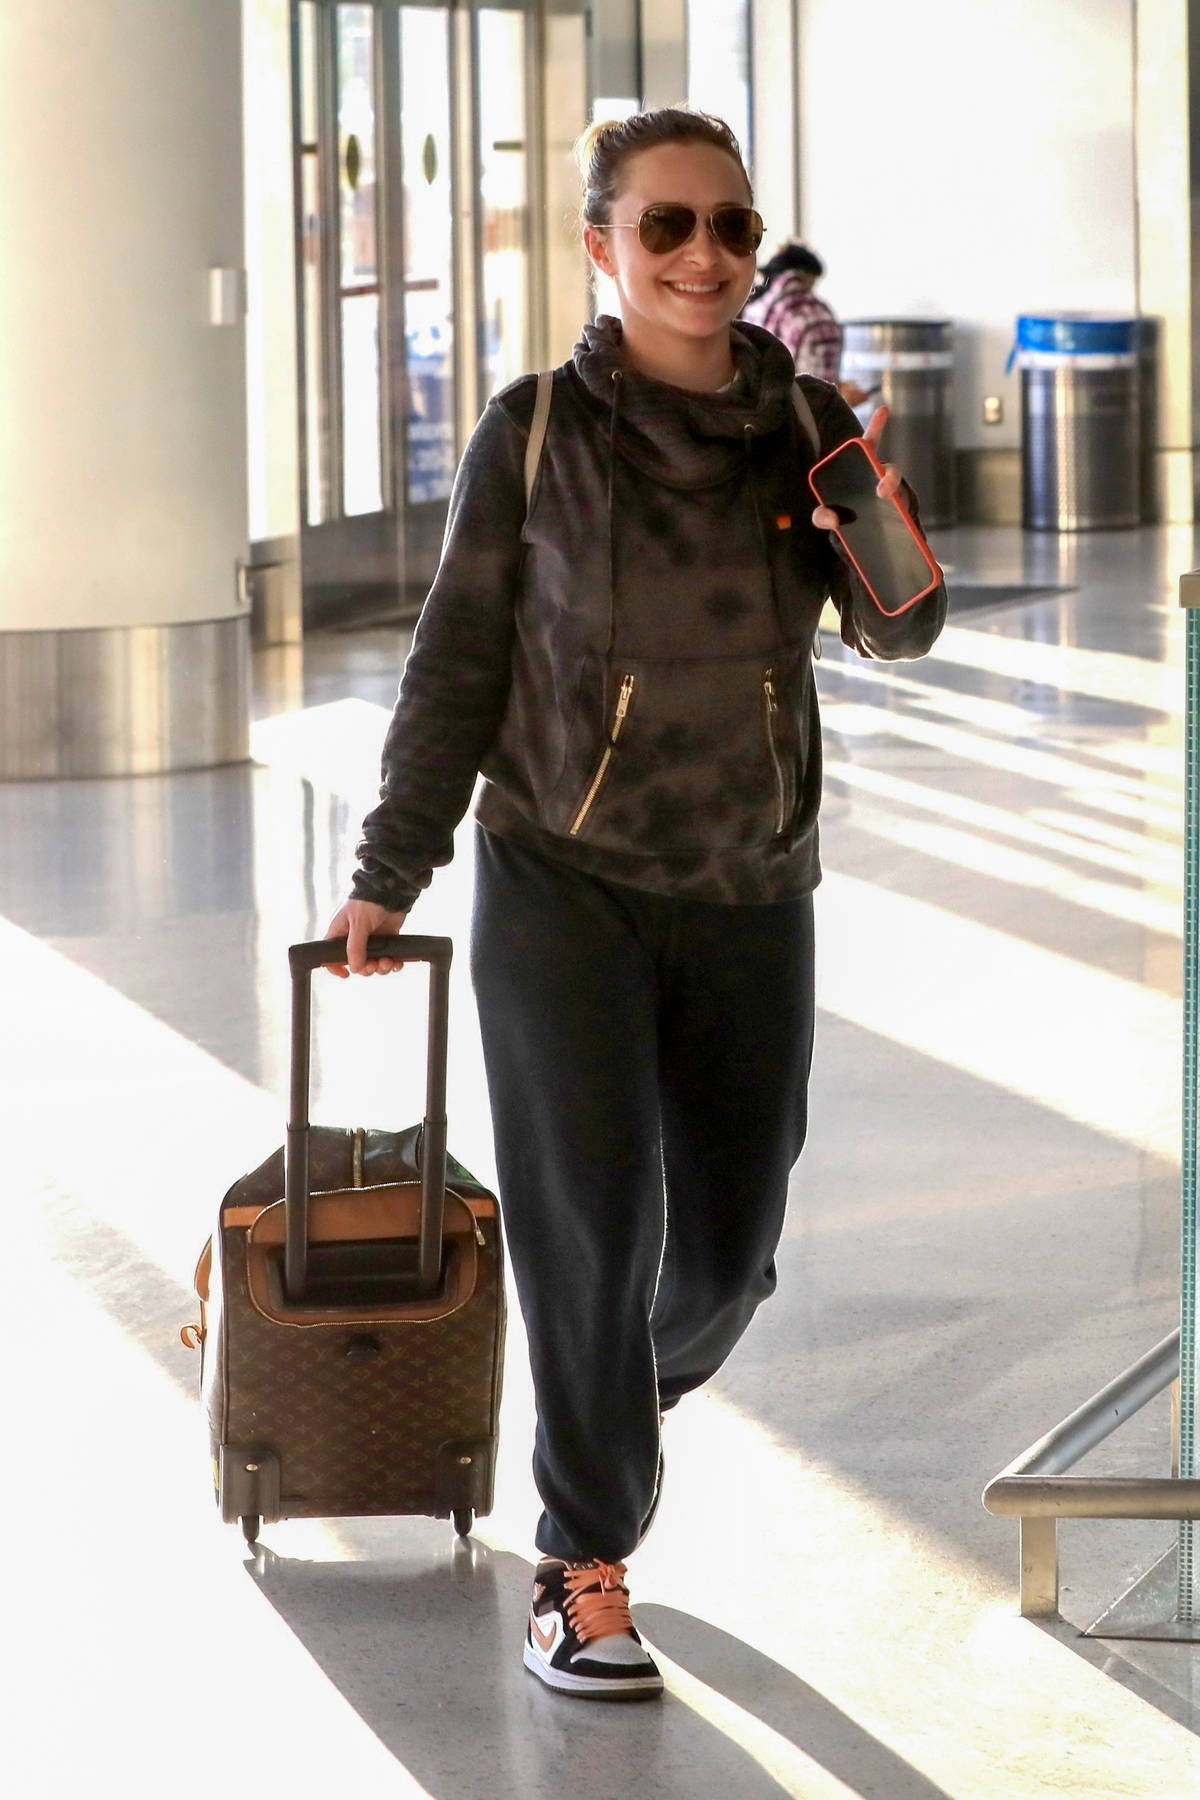 Hilary Duff arrives at the airport carrying Louis Vuitton luggage